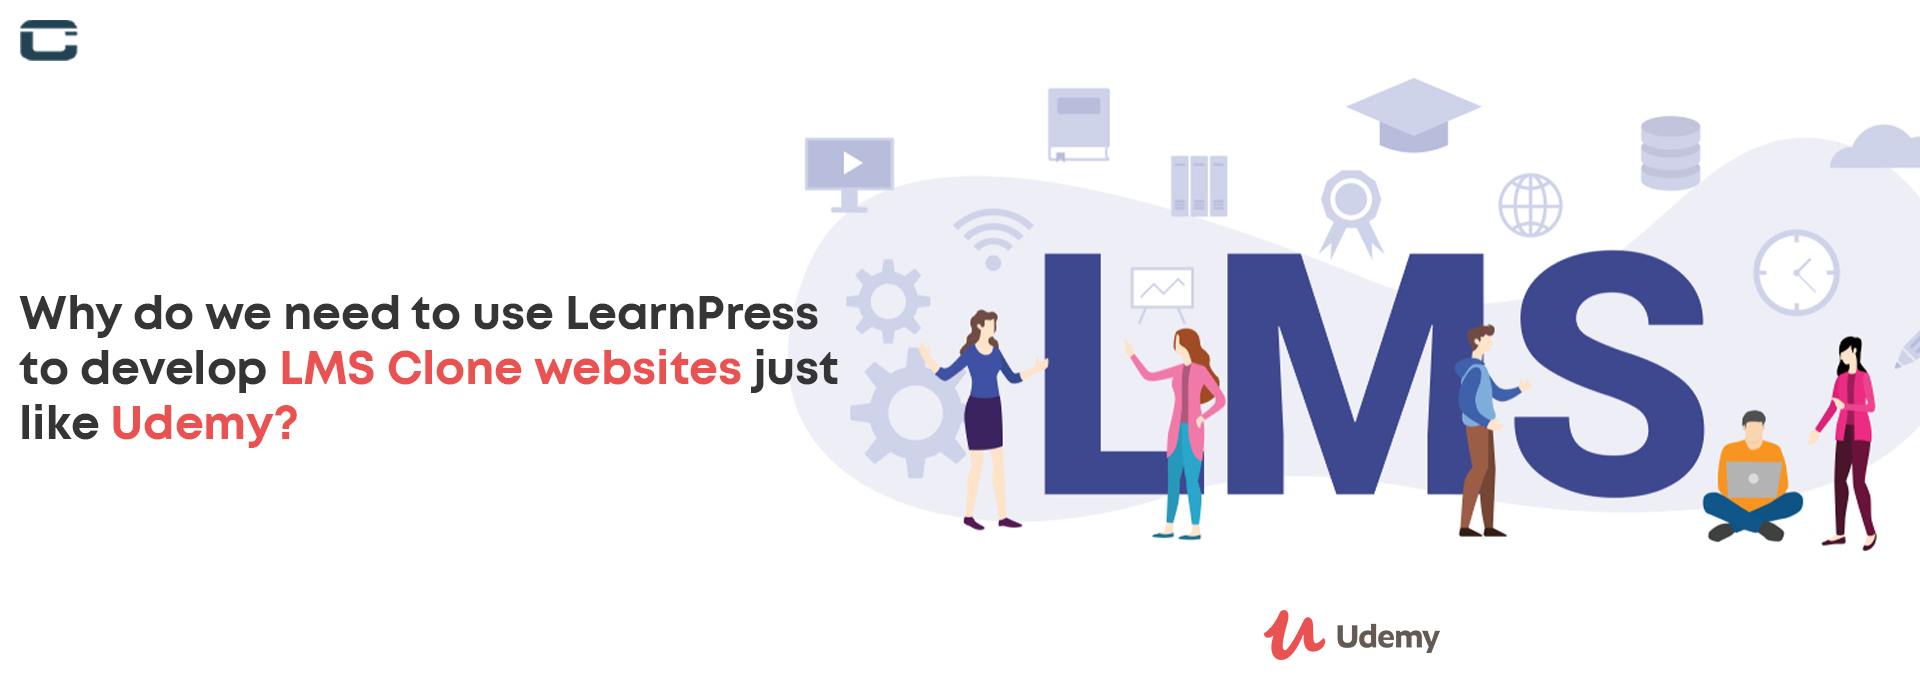 Why do we need to use LearnPress to develop LMS Clone websites just like Udemy?